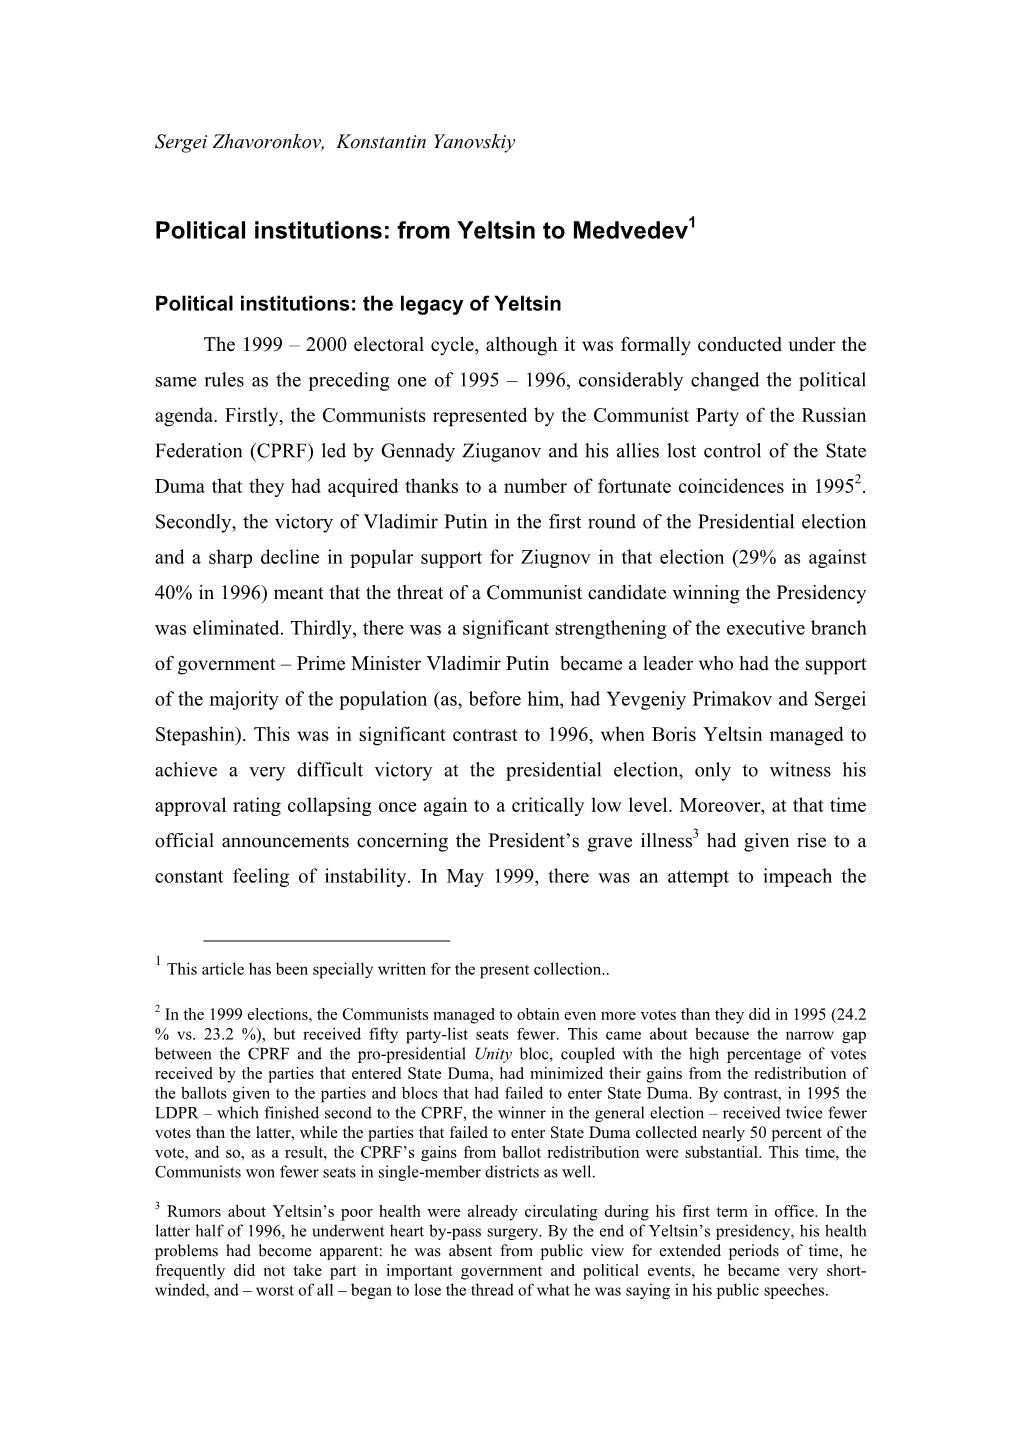 Political Institutions: from Yeltsin to Medvedev1